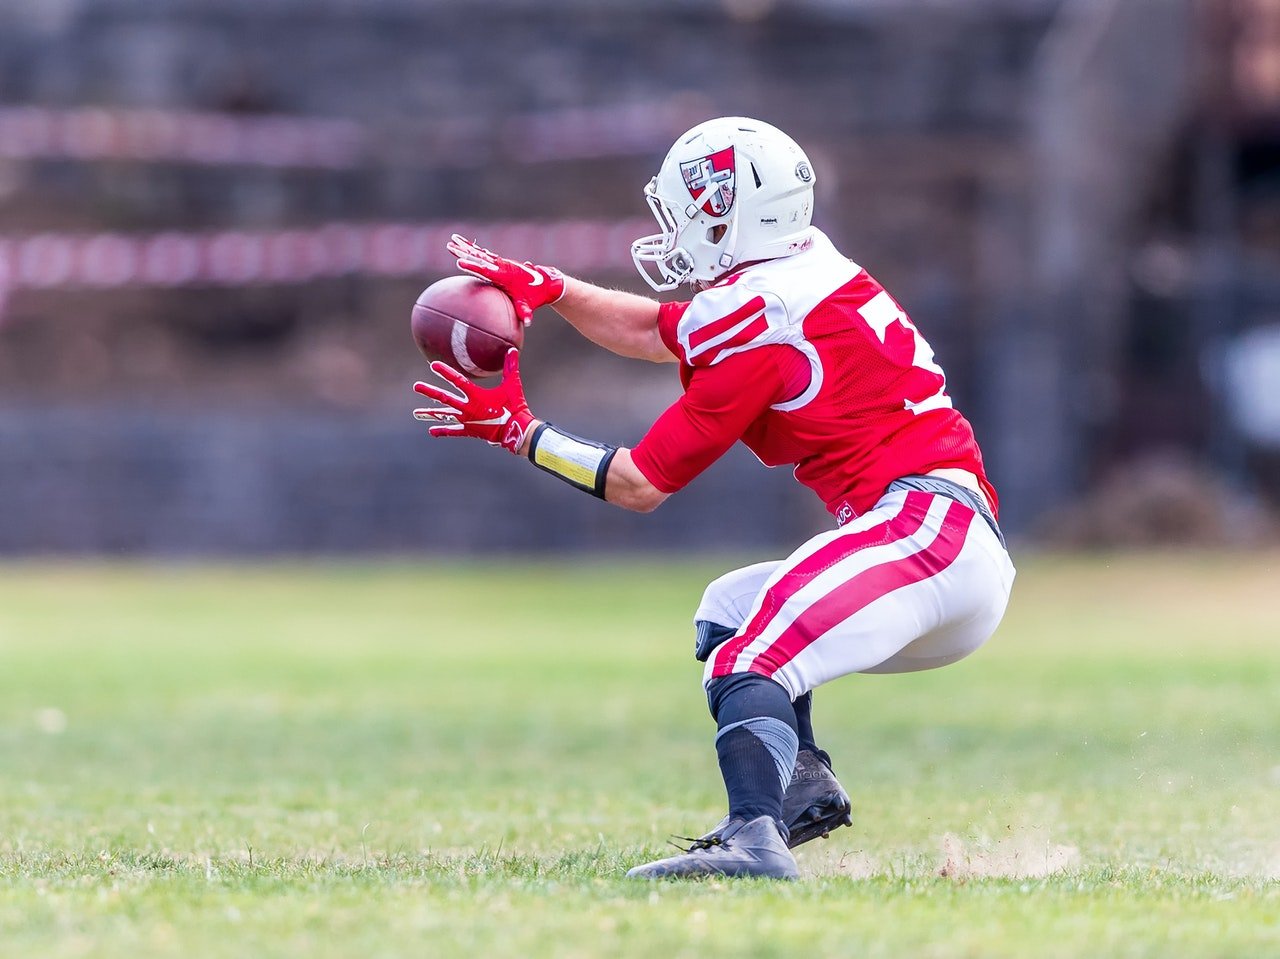 Photo of a football player catching a ball | Photo: Pexels